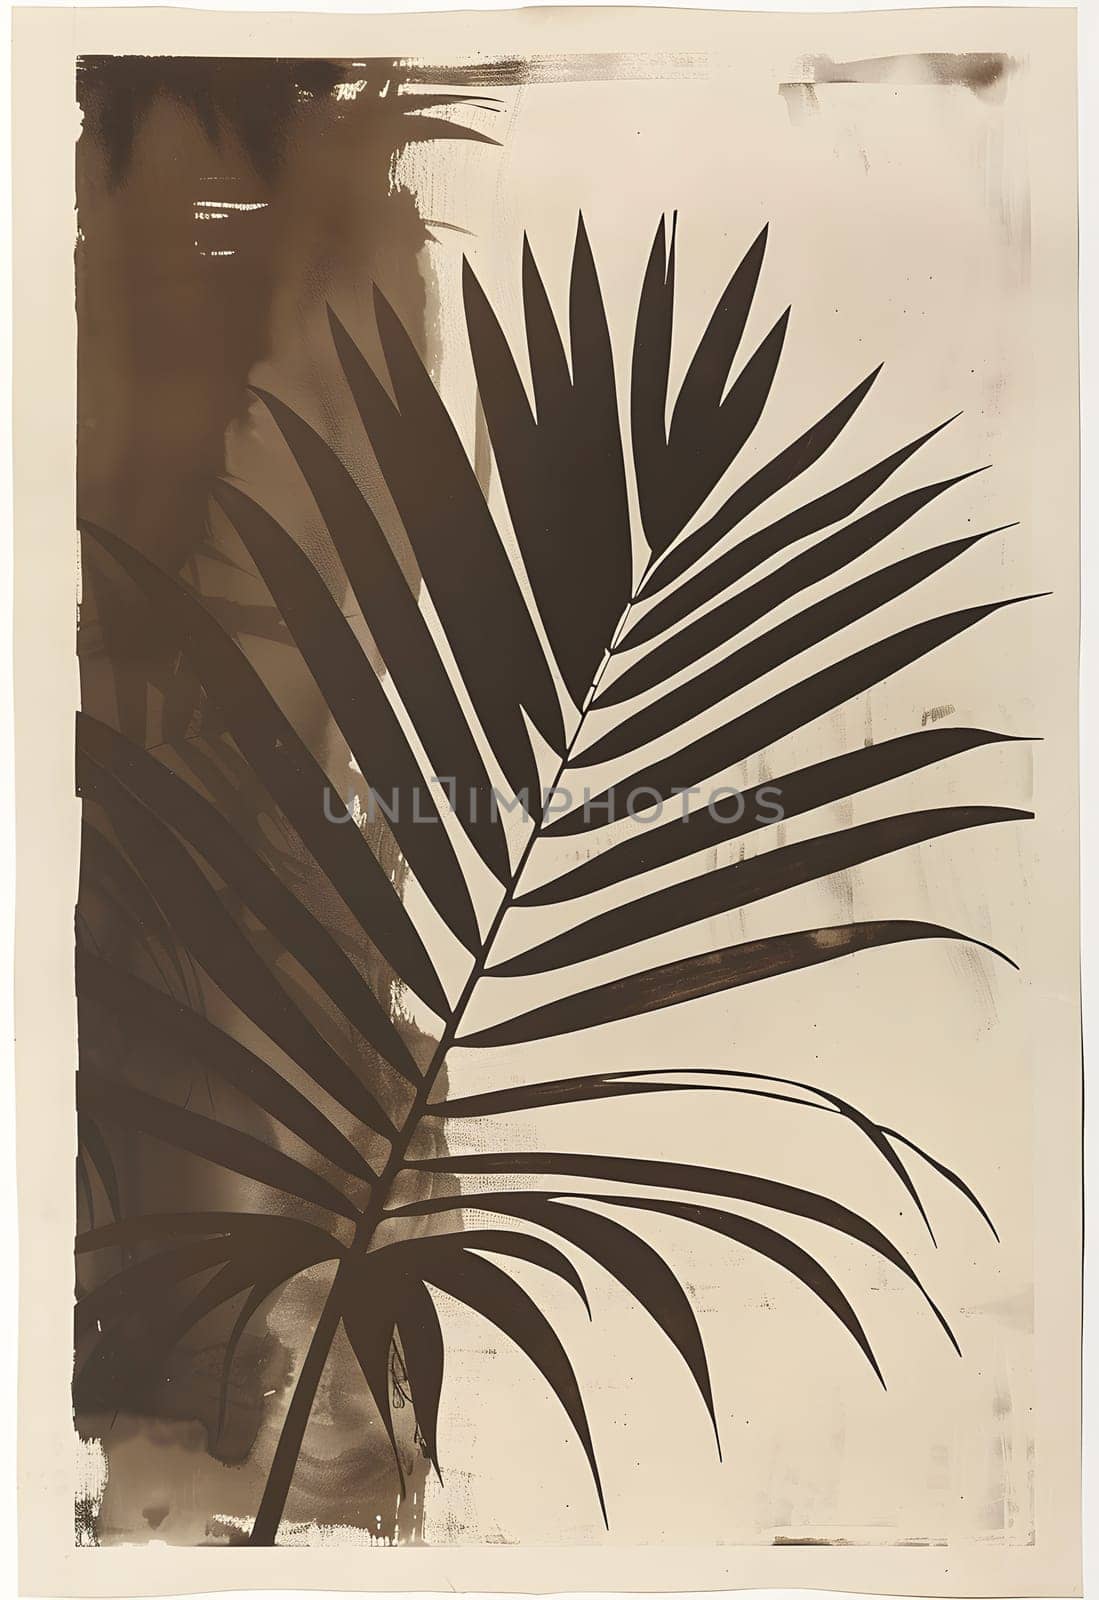 A monochromatic photo of a palm tree leaf against a beige backdrop. The image captures the intricate details of the leafs featherlike structure, resembling an artistic painting